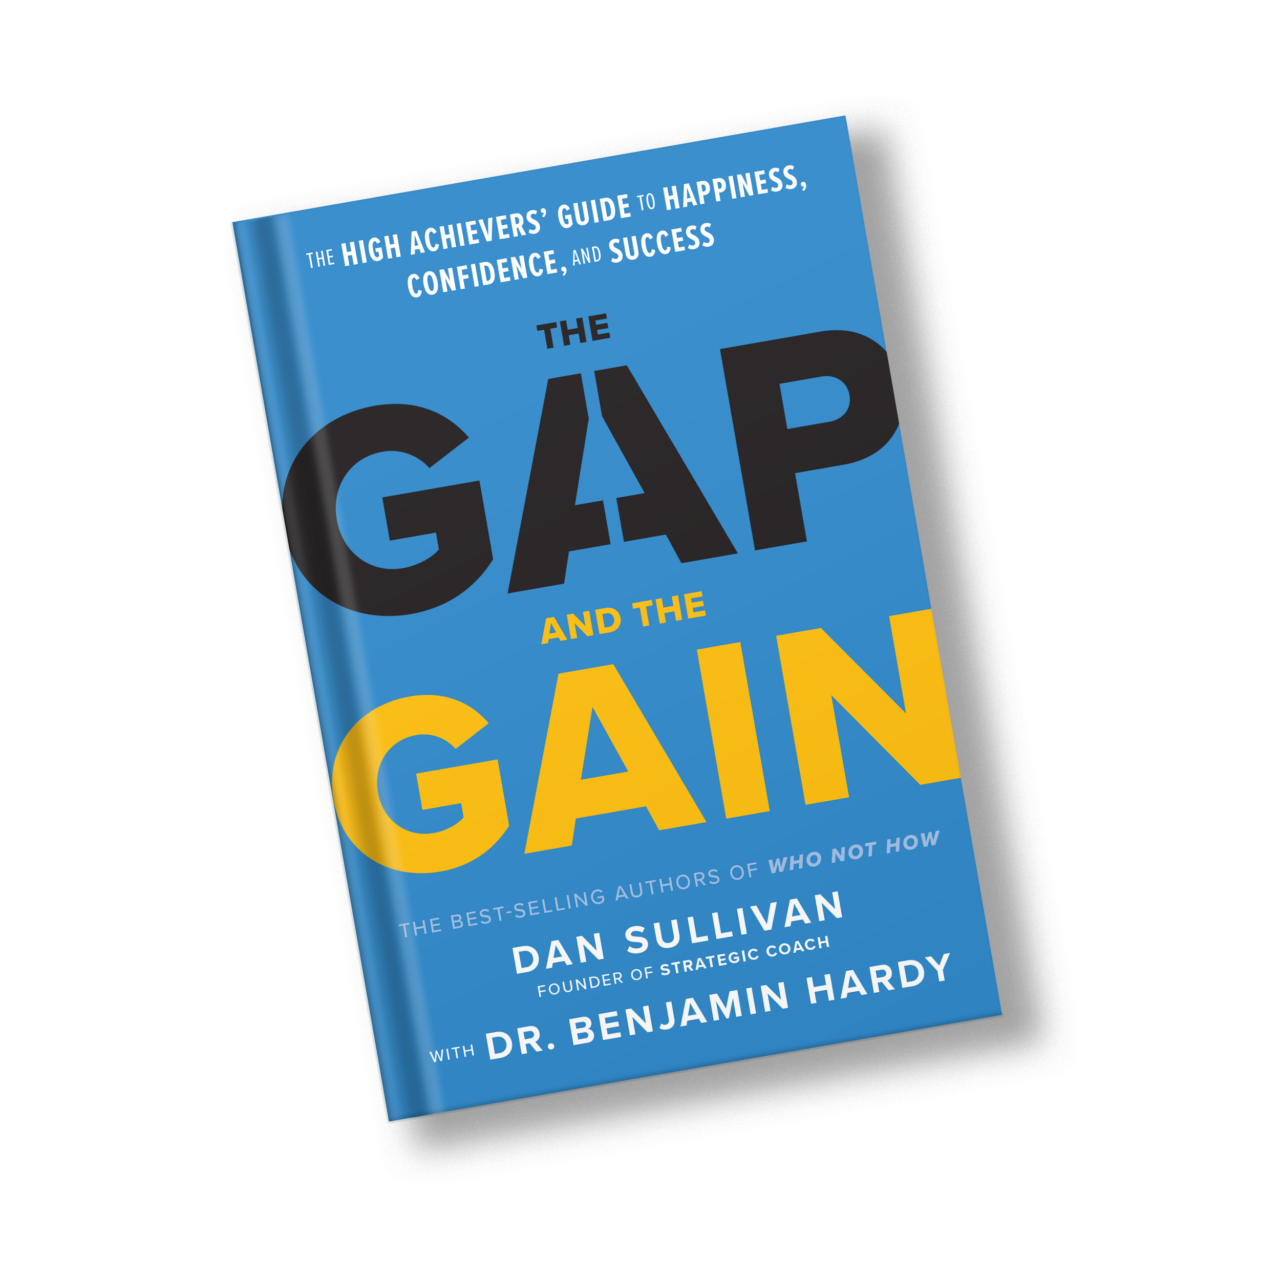 The Gap and the Gain book cover